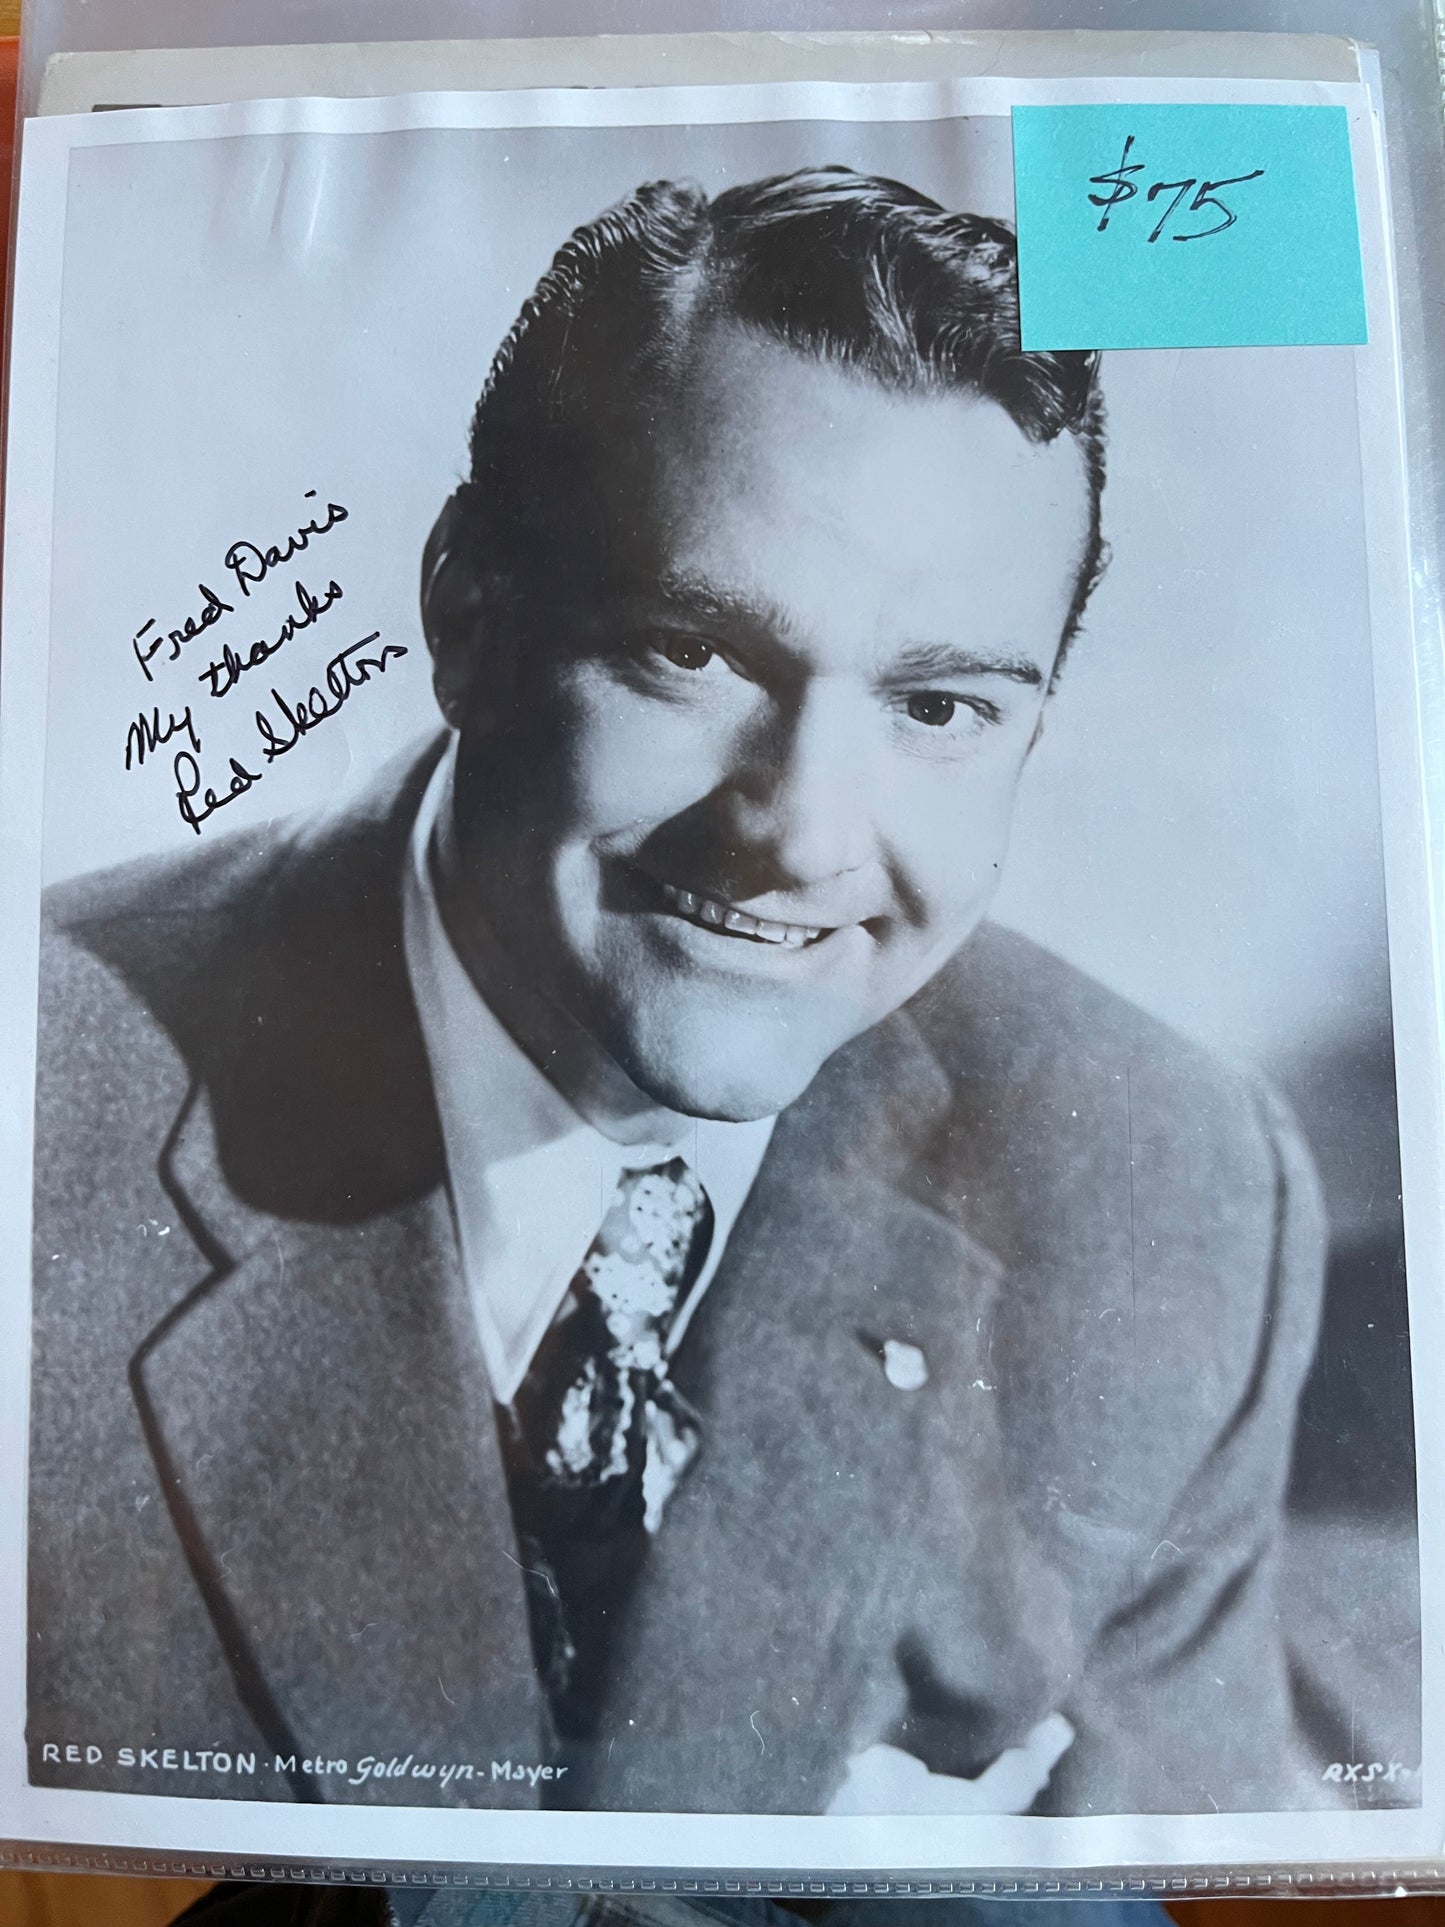 RED SKELTON, comedian and actor, autograph